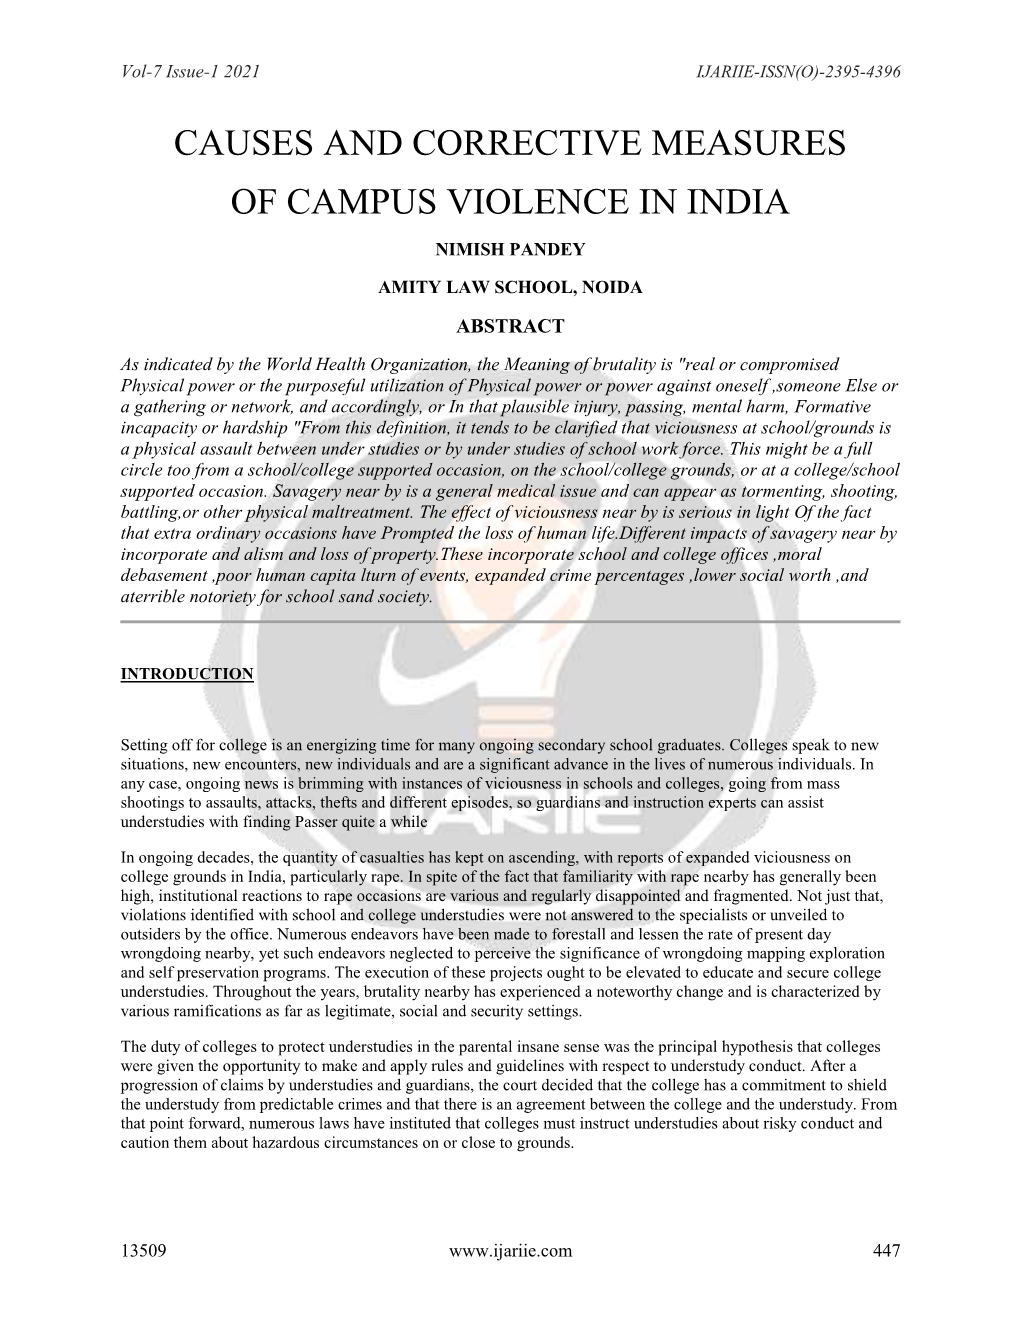 Causes and Corrective Measures of Campus Violence in India